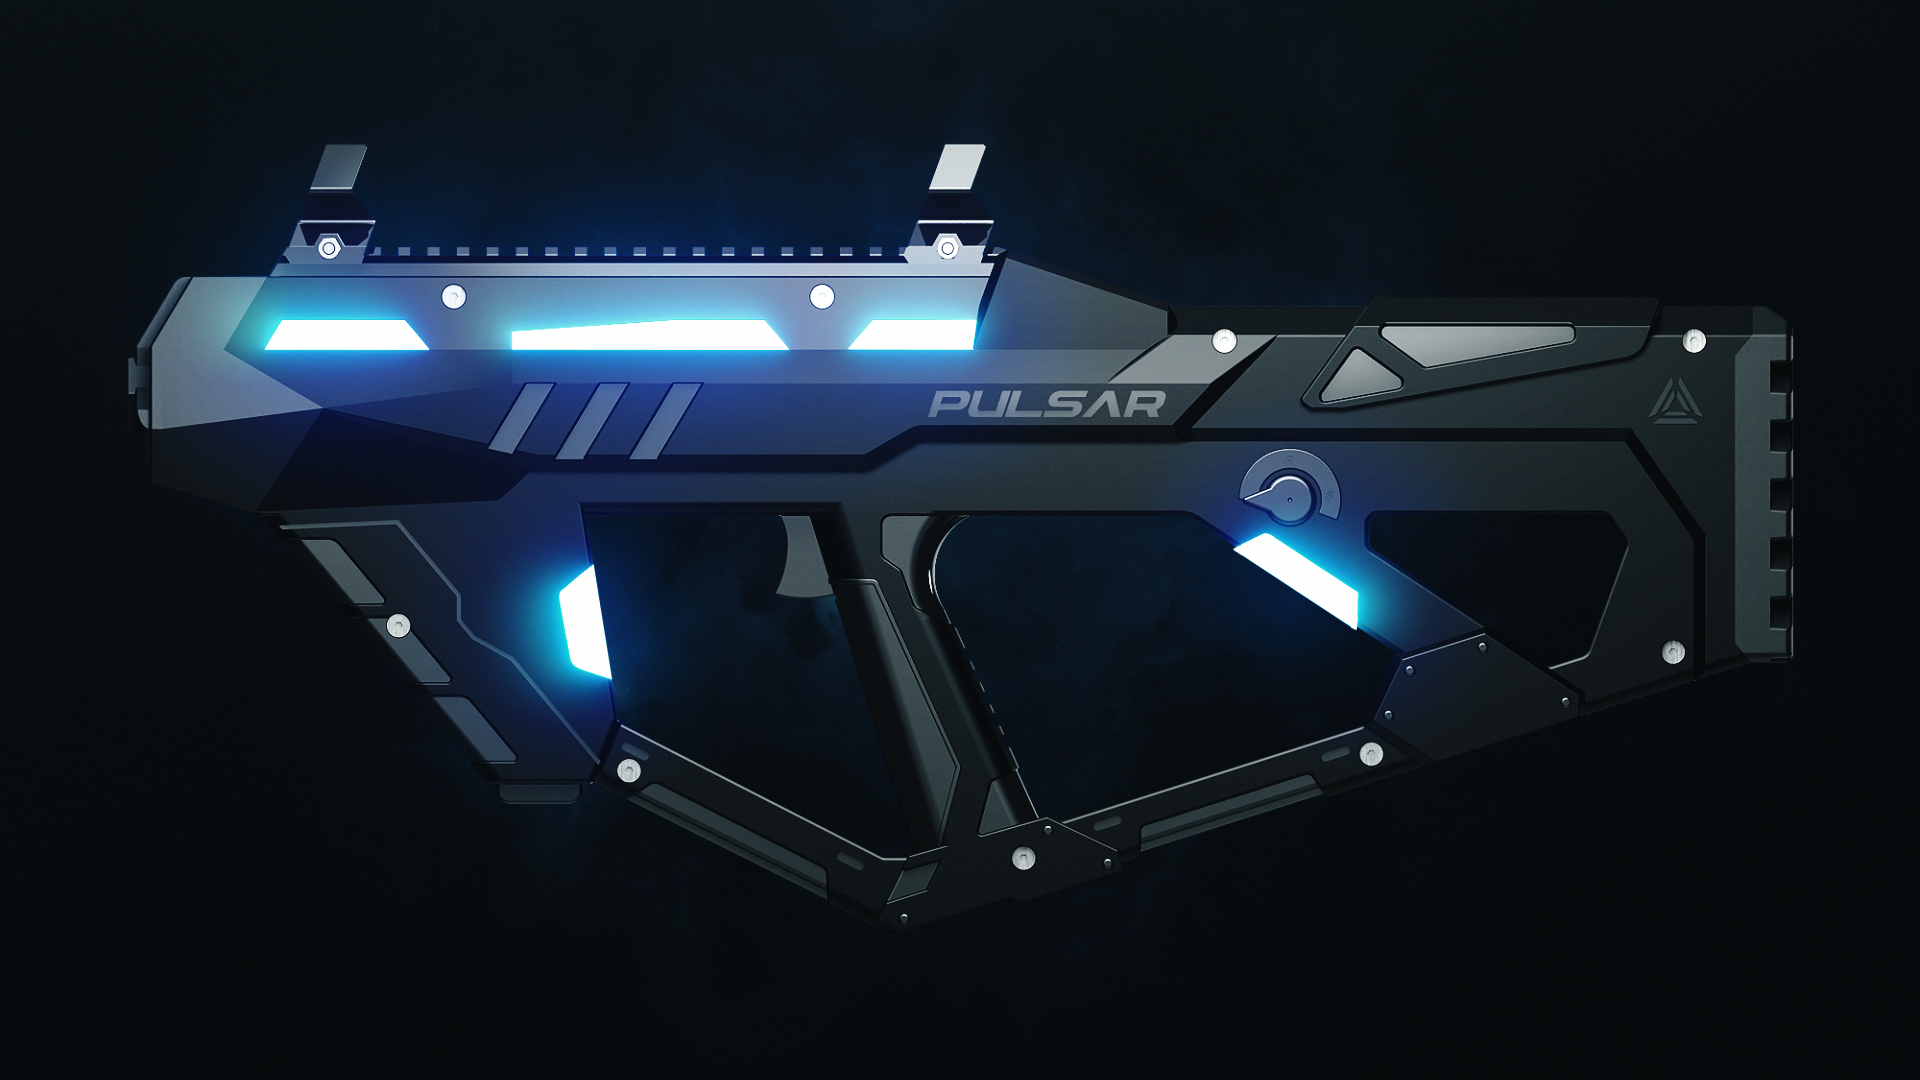 Pulsar Cosmoblaster is already available for pre-order